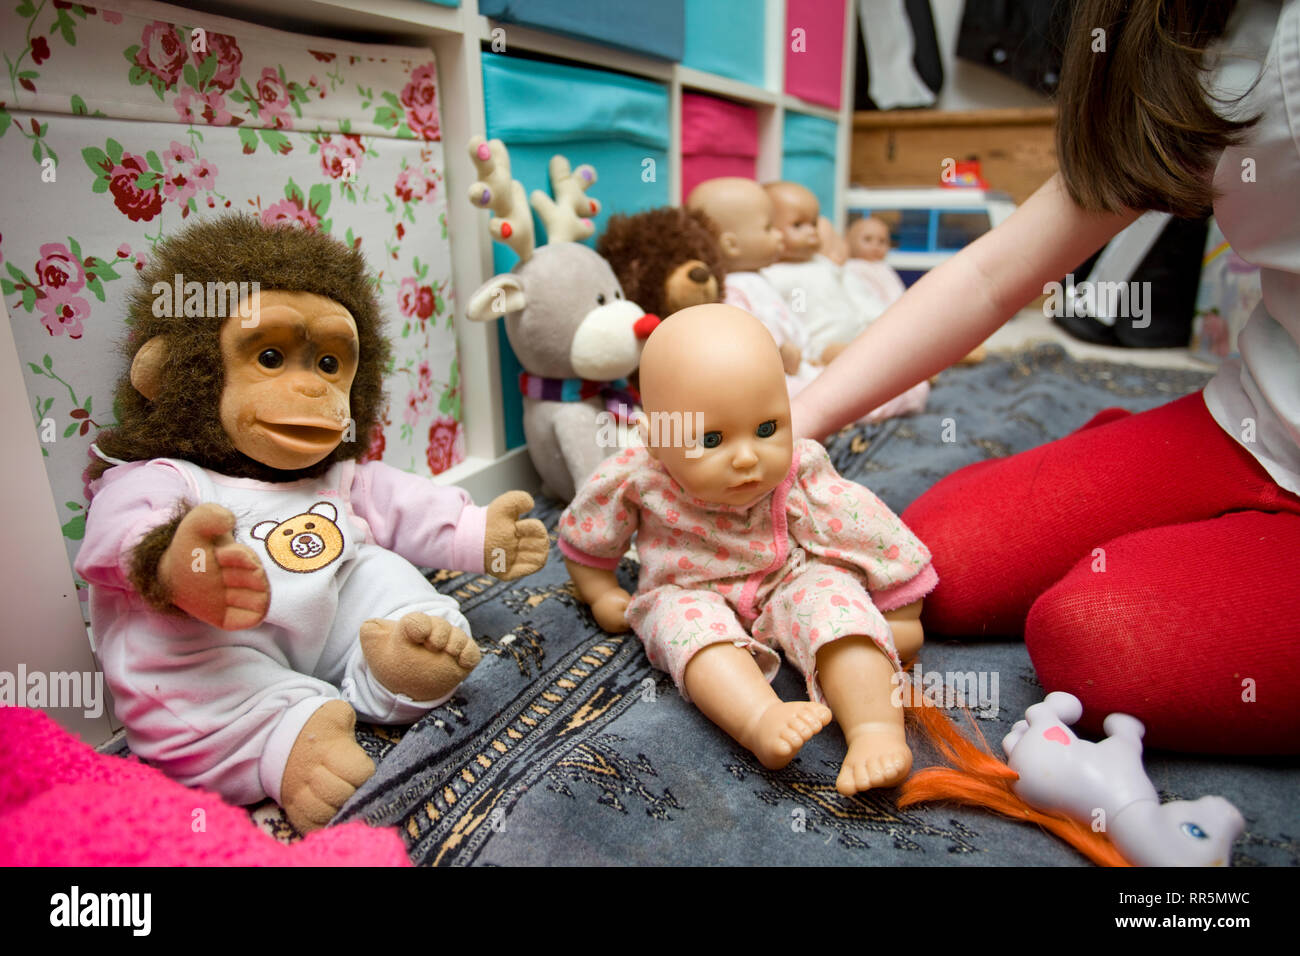 Child playing with dolls in playroom Stock Photo